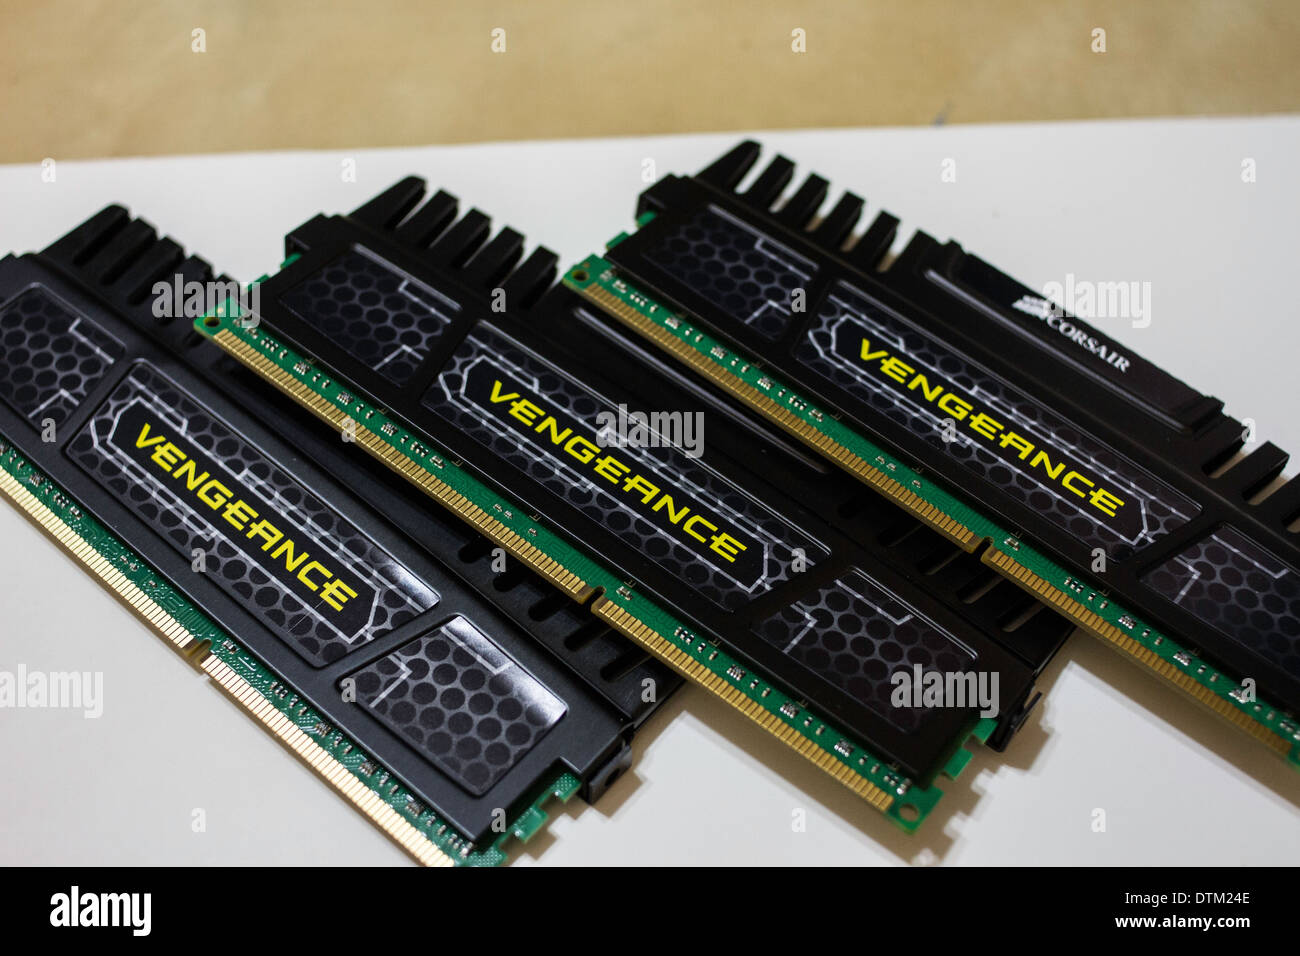 Corsair Vengeance sdram memory chips for an IBM PC with extra cooling fins Stock Photo